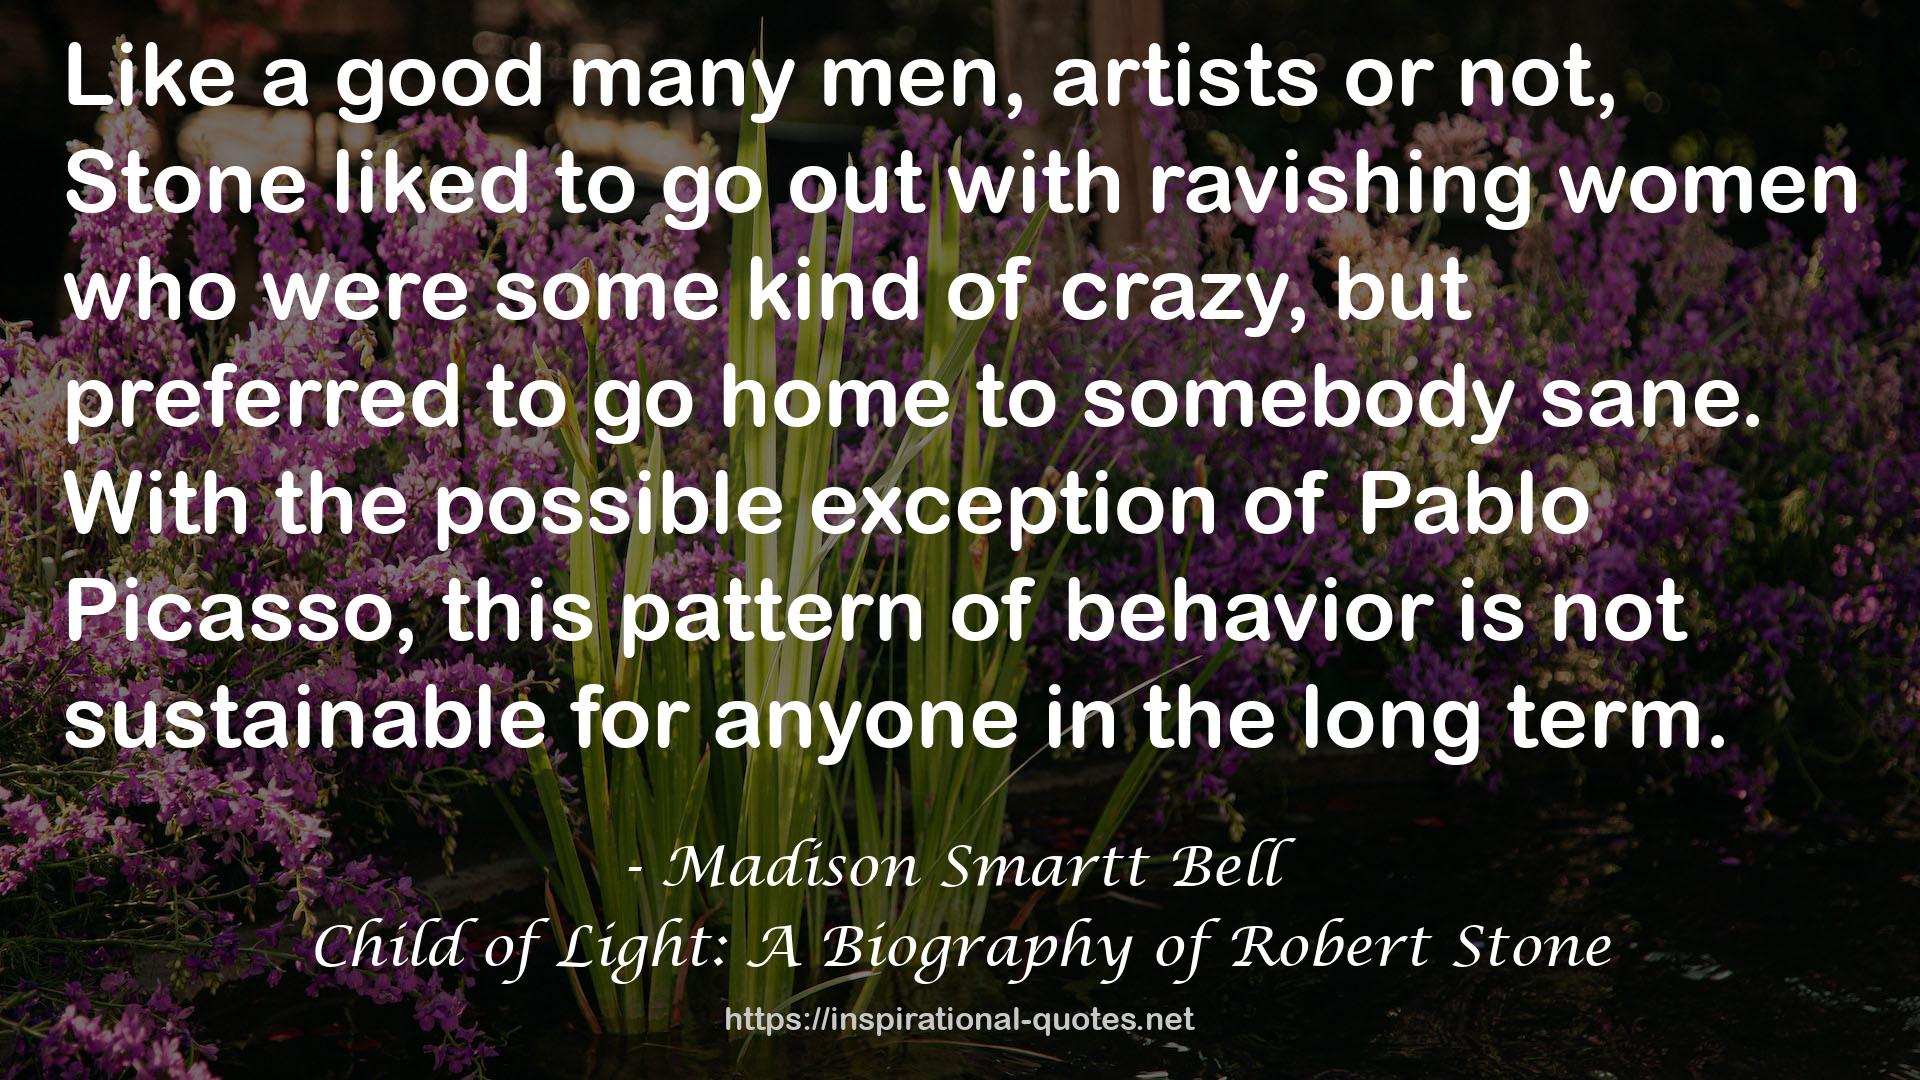 Child of Light: A Biography of Robert Stone QUOTES